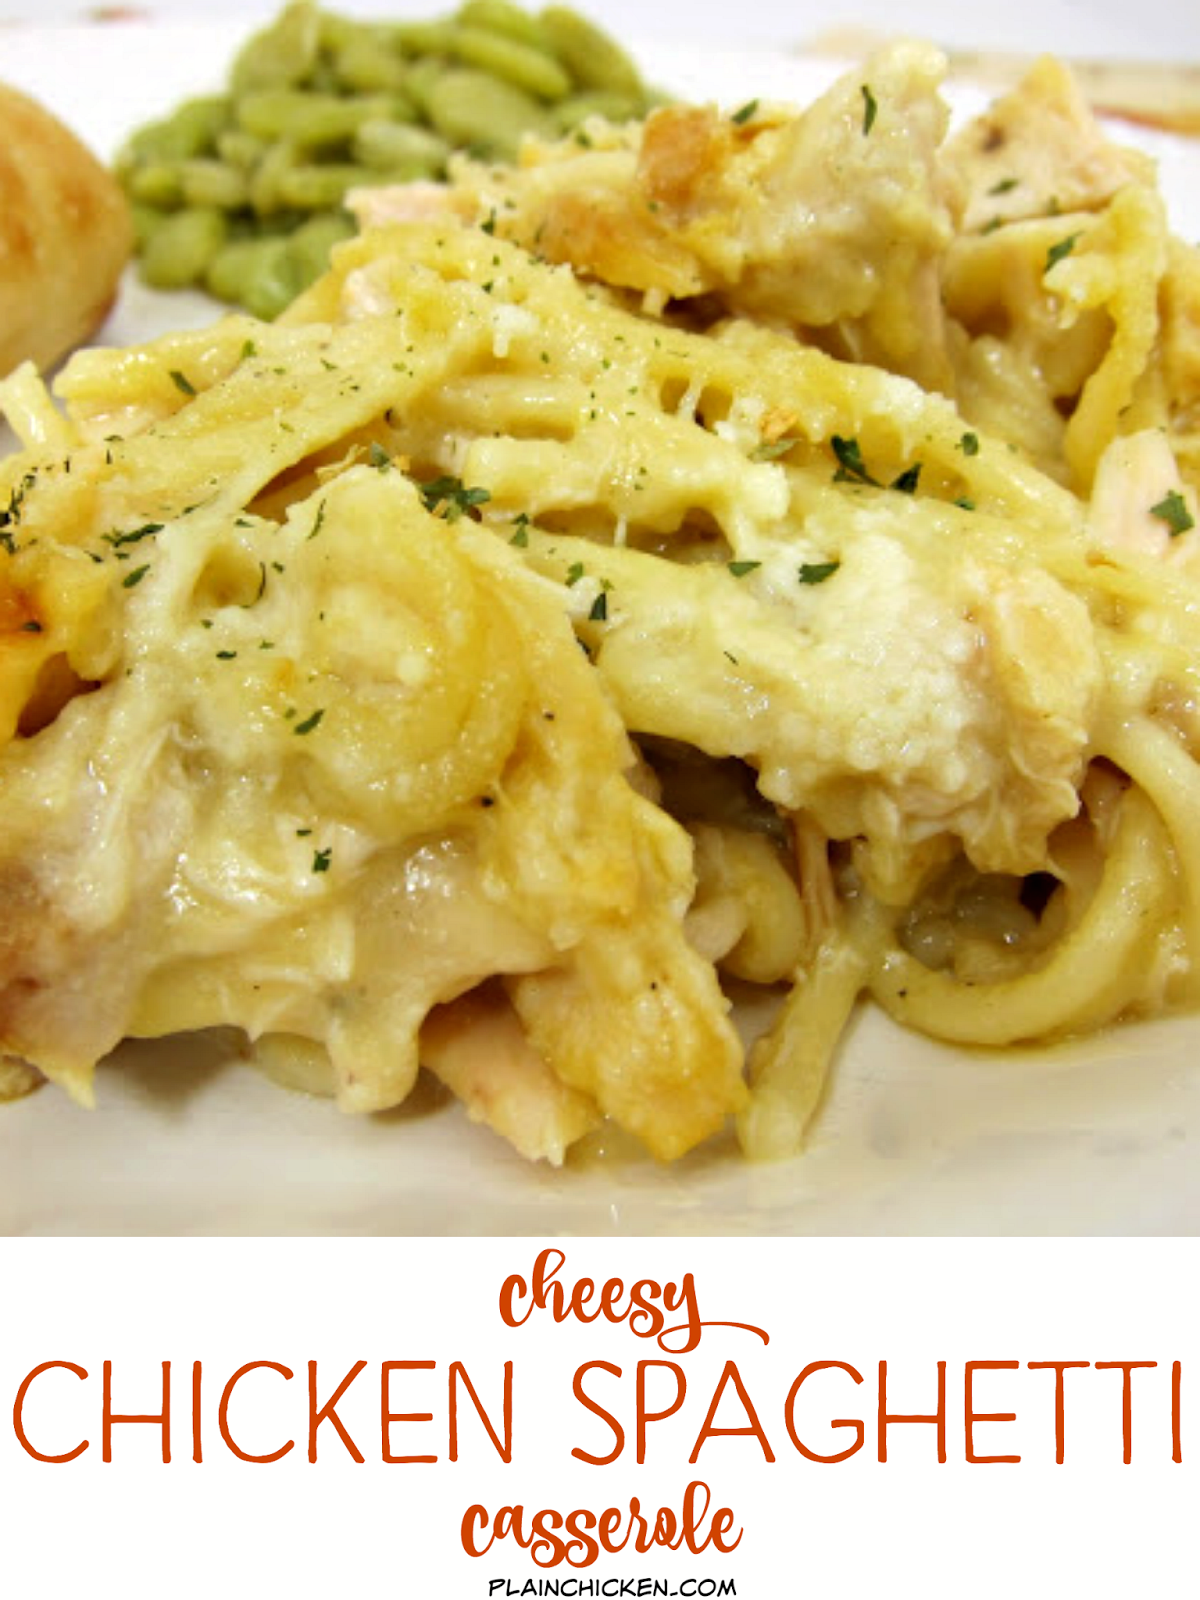 Cheesy Chicken Spaghetti Casserole - spaghetti, chicken, cream of chicken, milk, onion, garlic, mozzarella and parmesan cheese - Ready in 30 minutes! We love this quick weeknight meal!! Can make ahead of time and freeze or refrigerate for later. Kids love this casserole!!